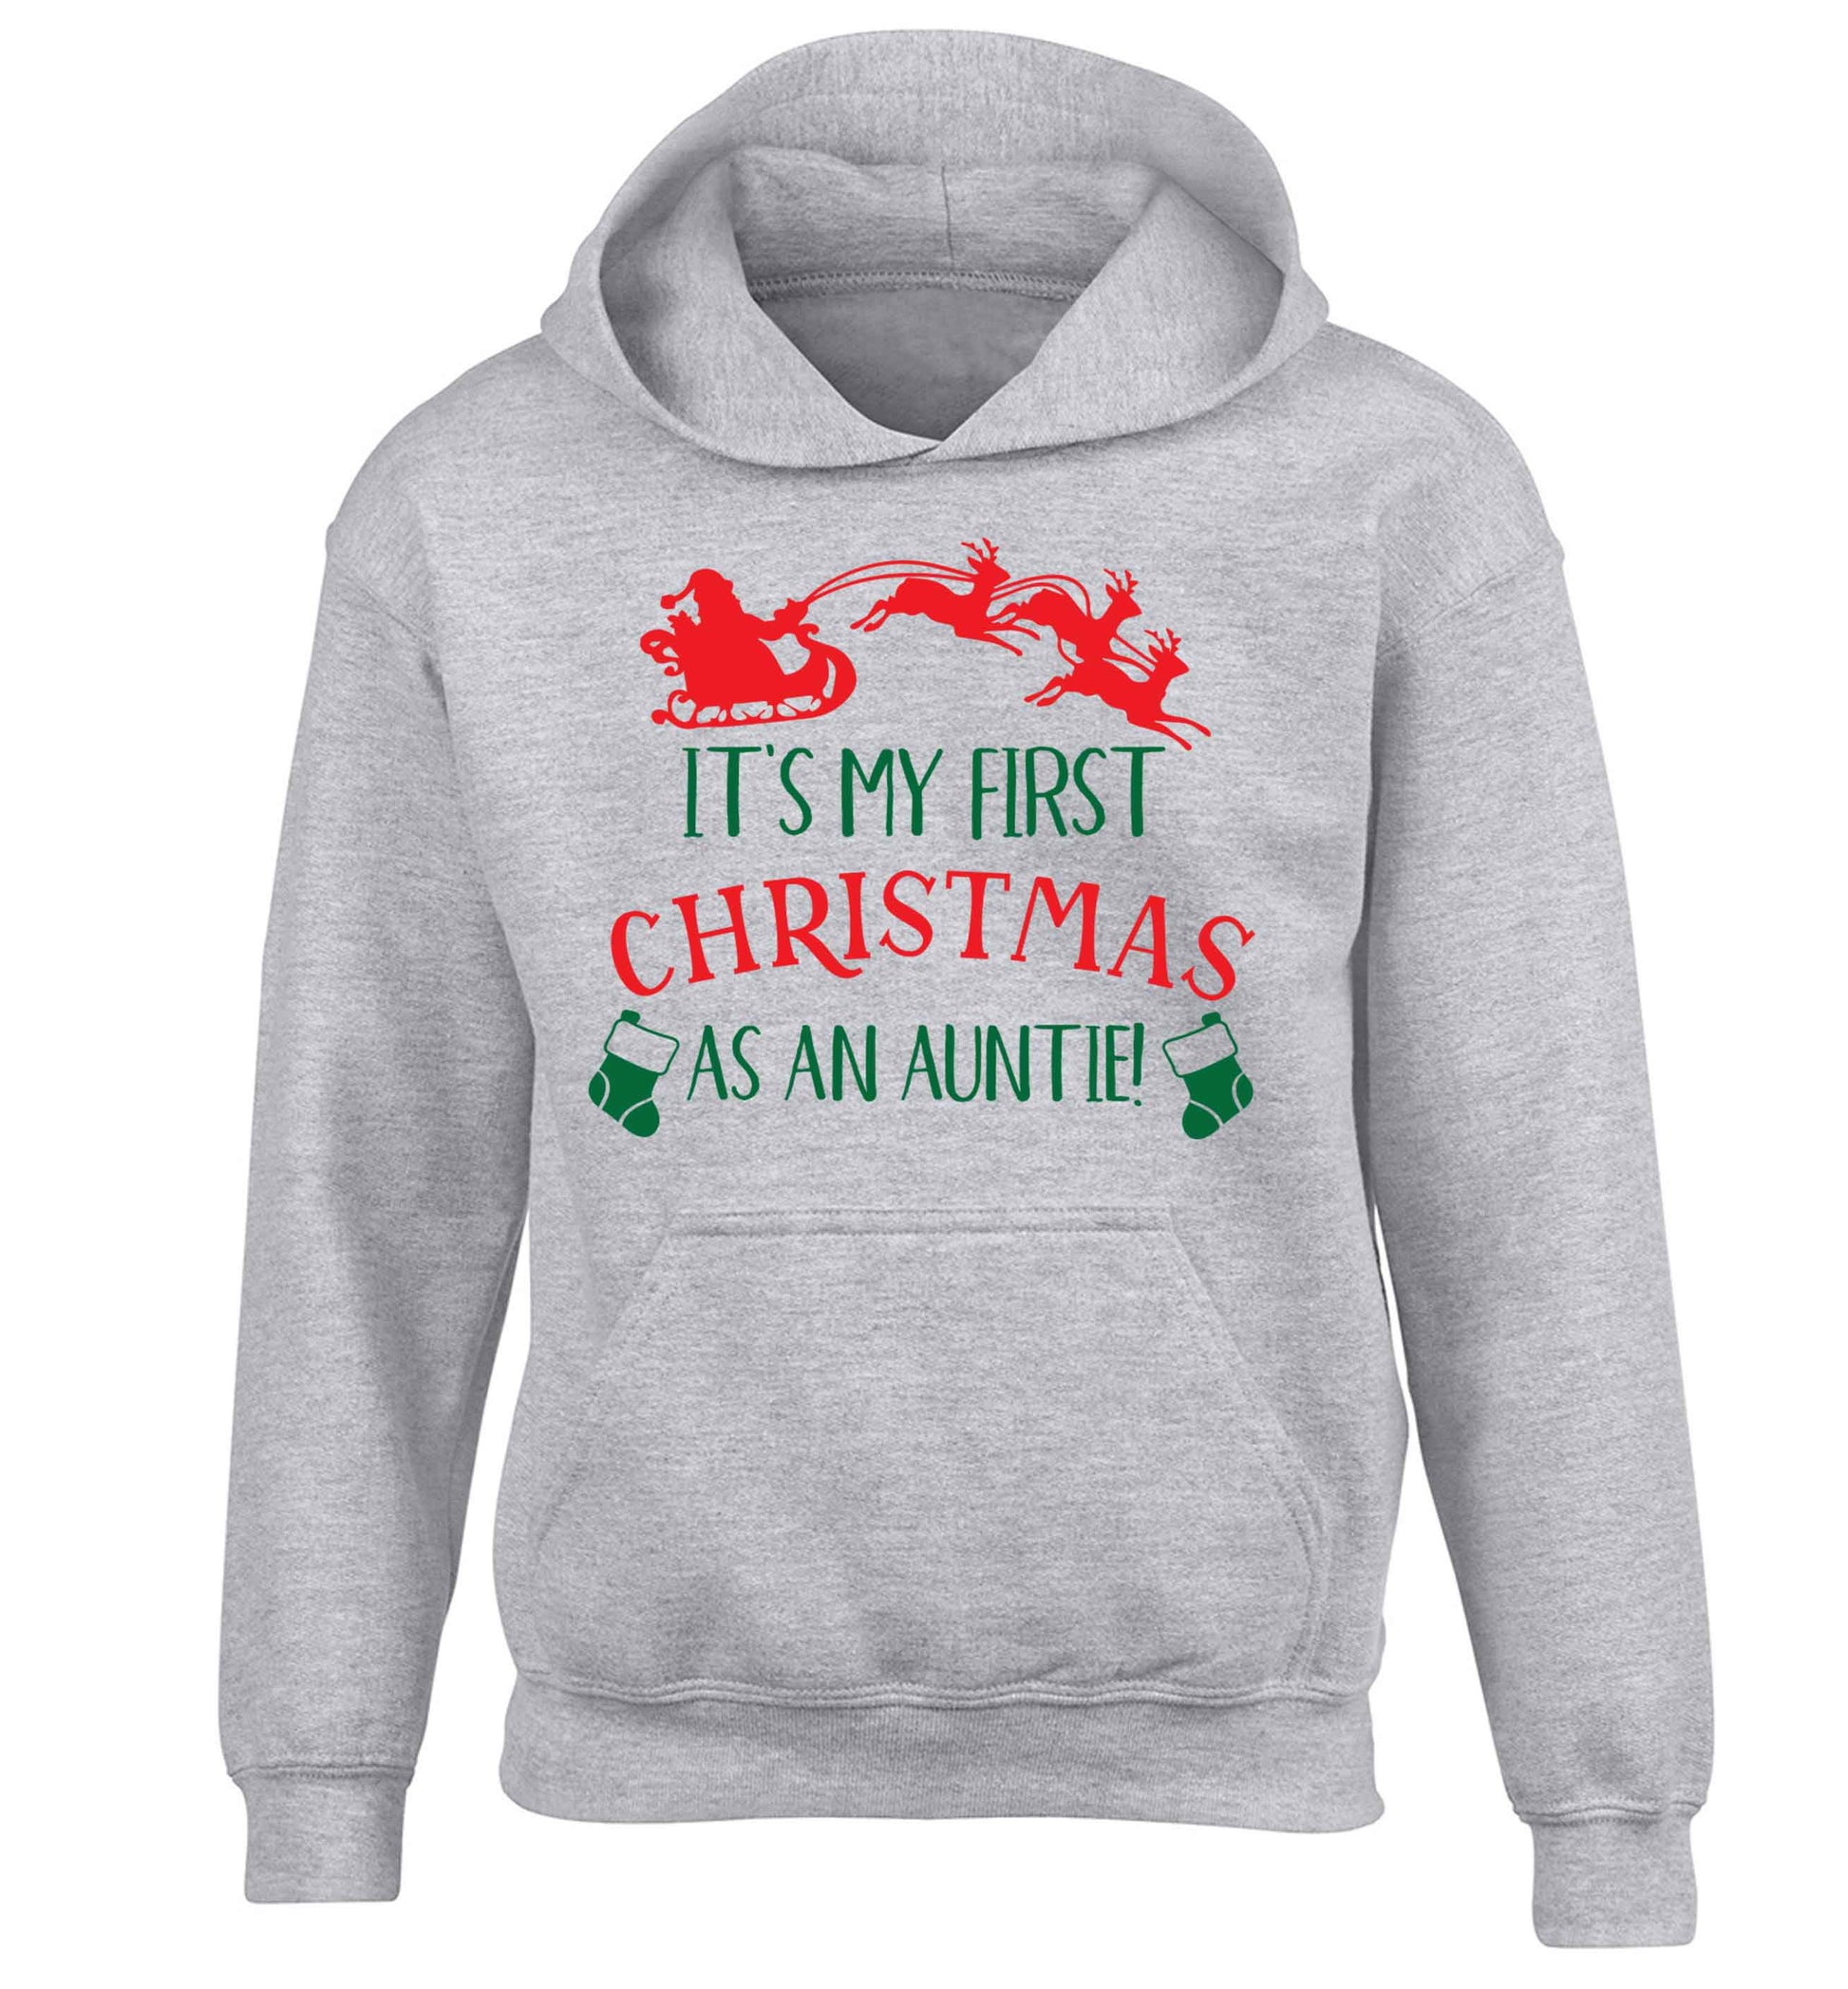 It's my first Christmas as an auntie! children's grey hoodie 12-13 Years